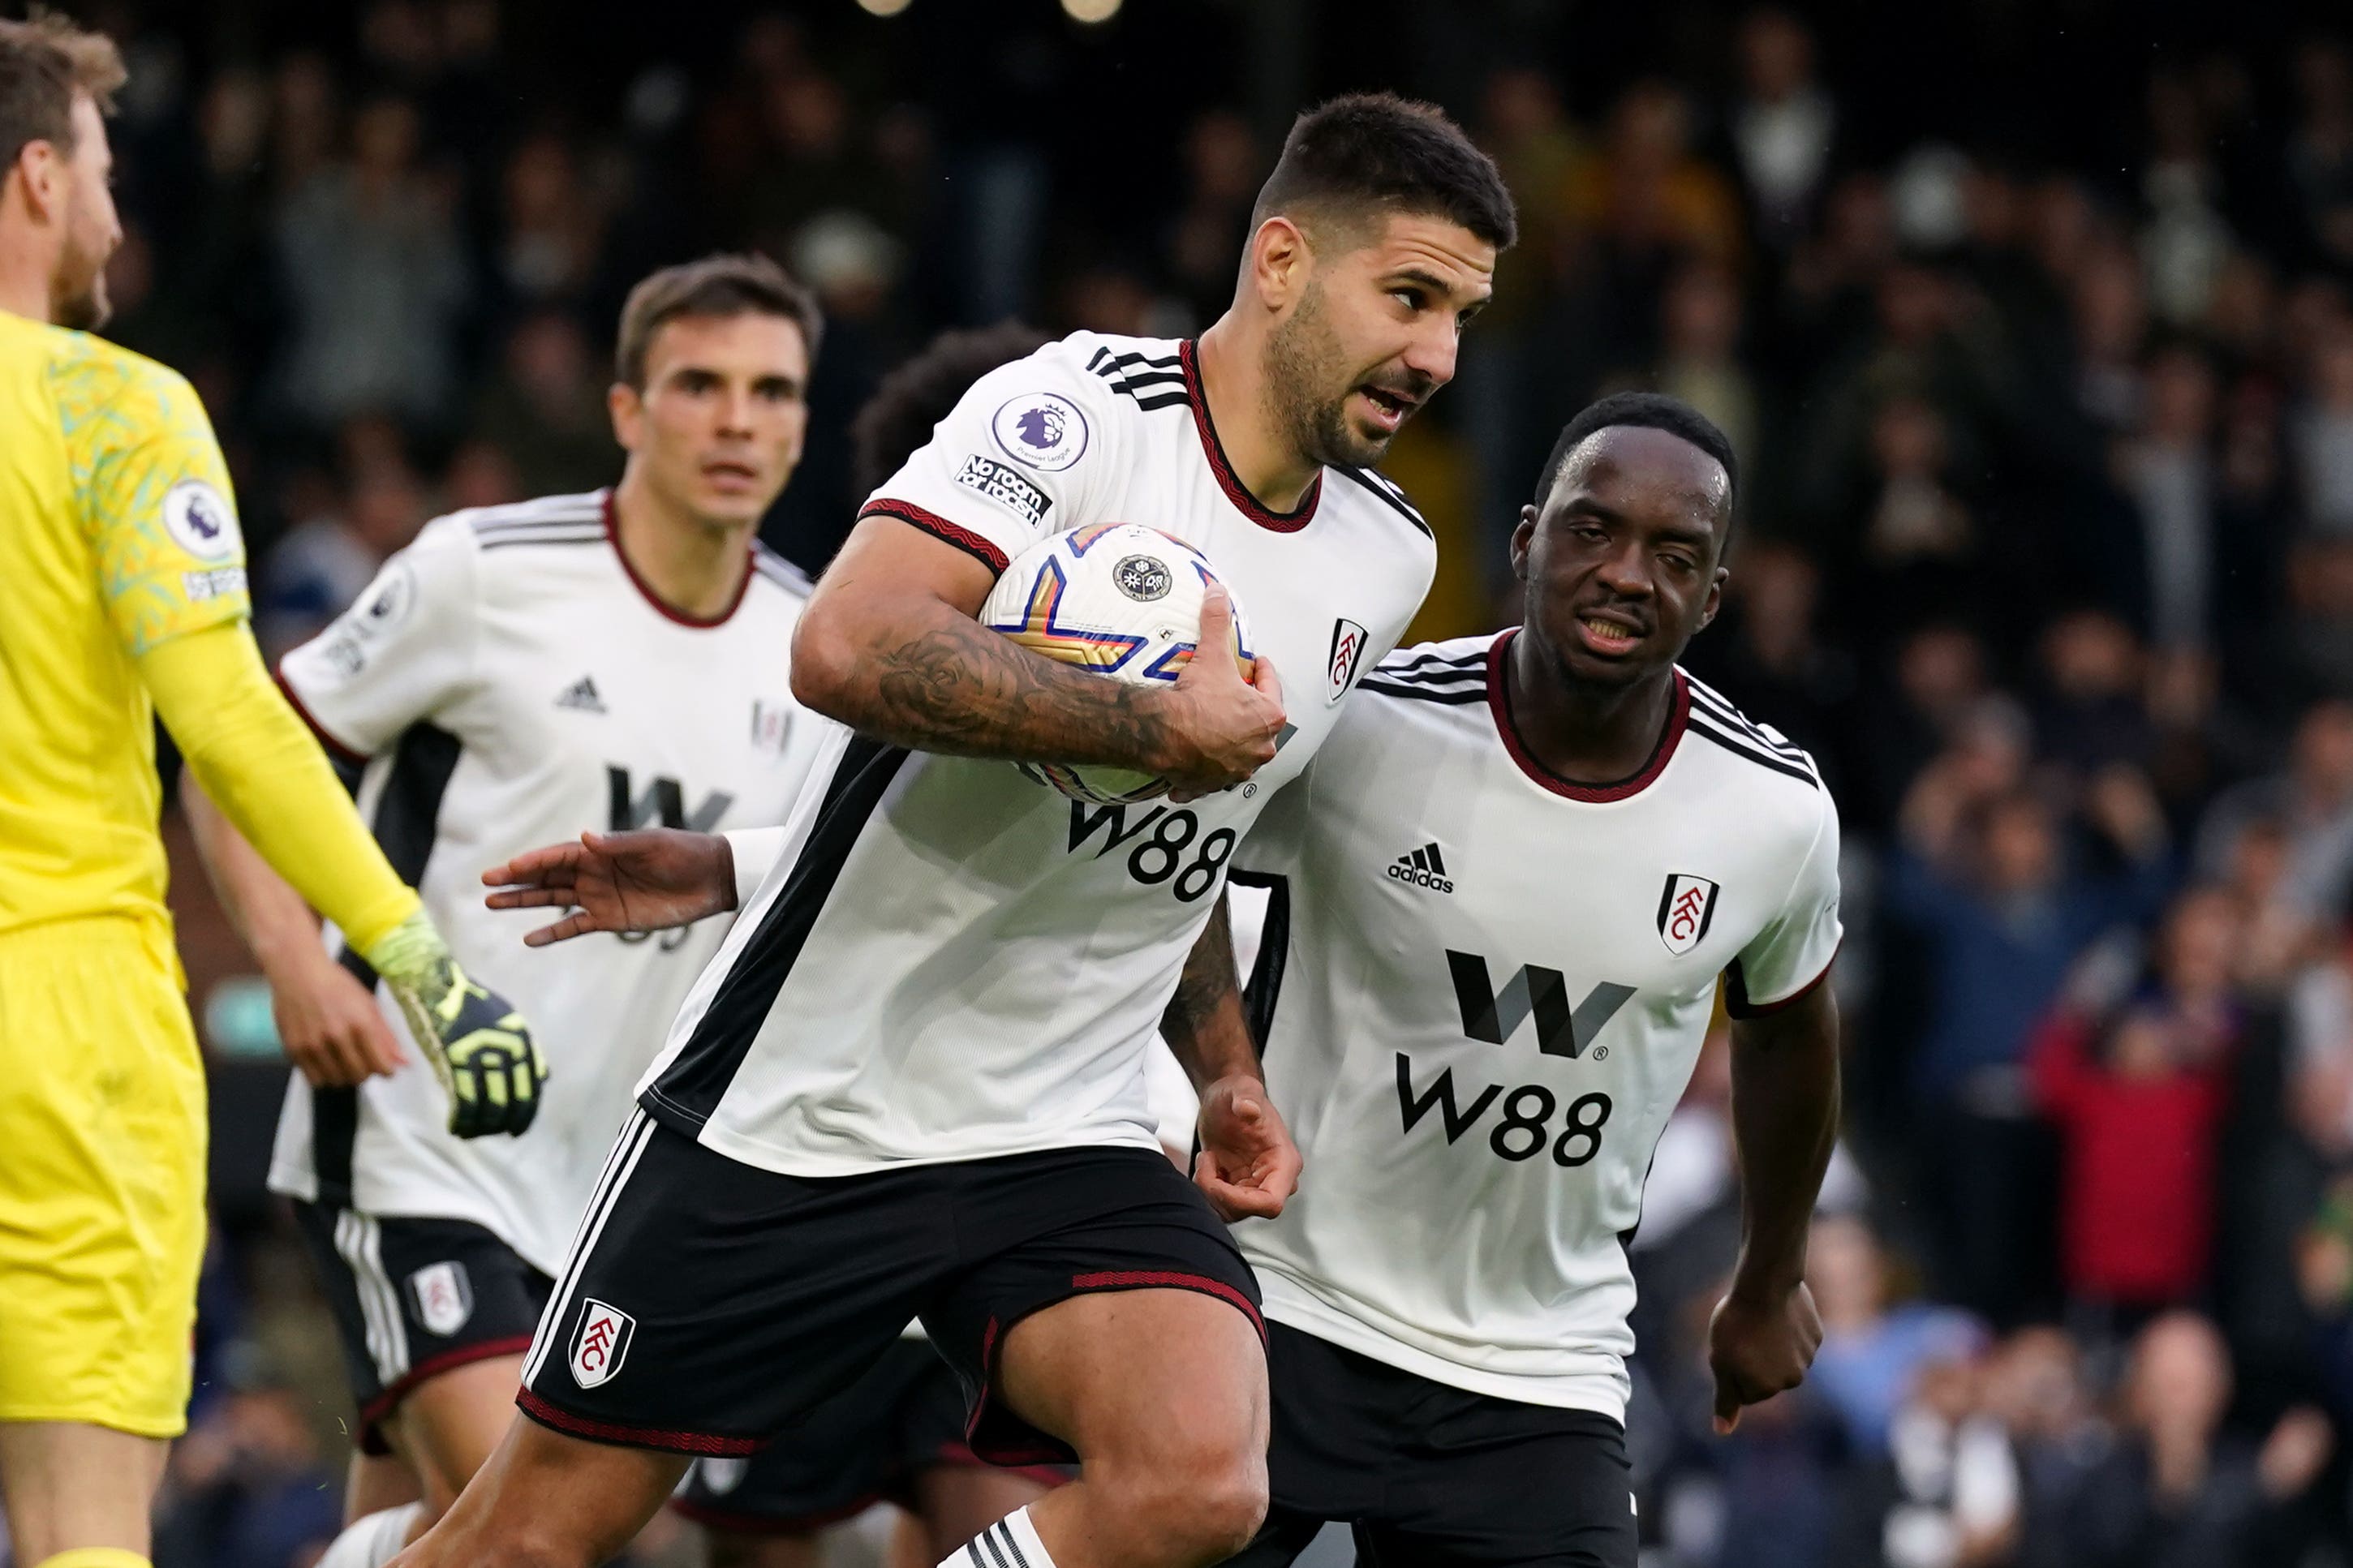 Aleksandar Mitrovic equalised from the spot as Fulham came from behind to draw 2-2